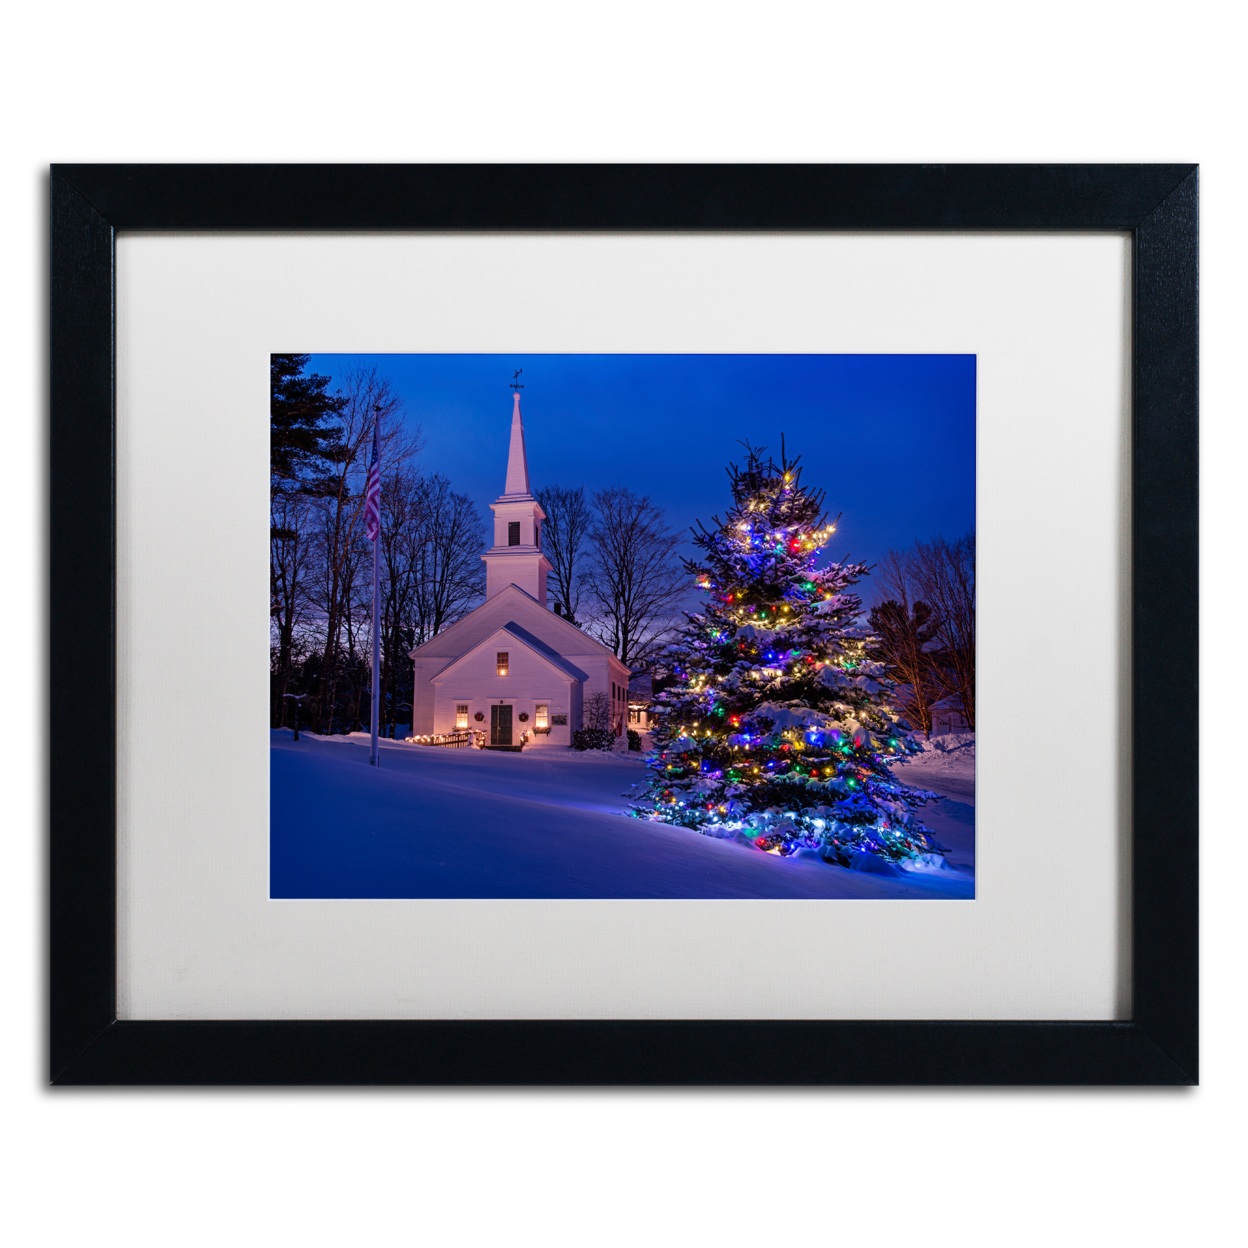 Michael Blanchette Photography 'New England Xmas' Black Wooden Framed Art 18 X 22 Inches